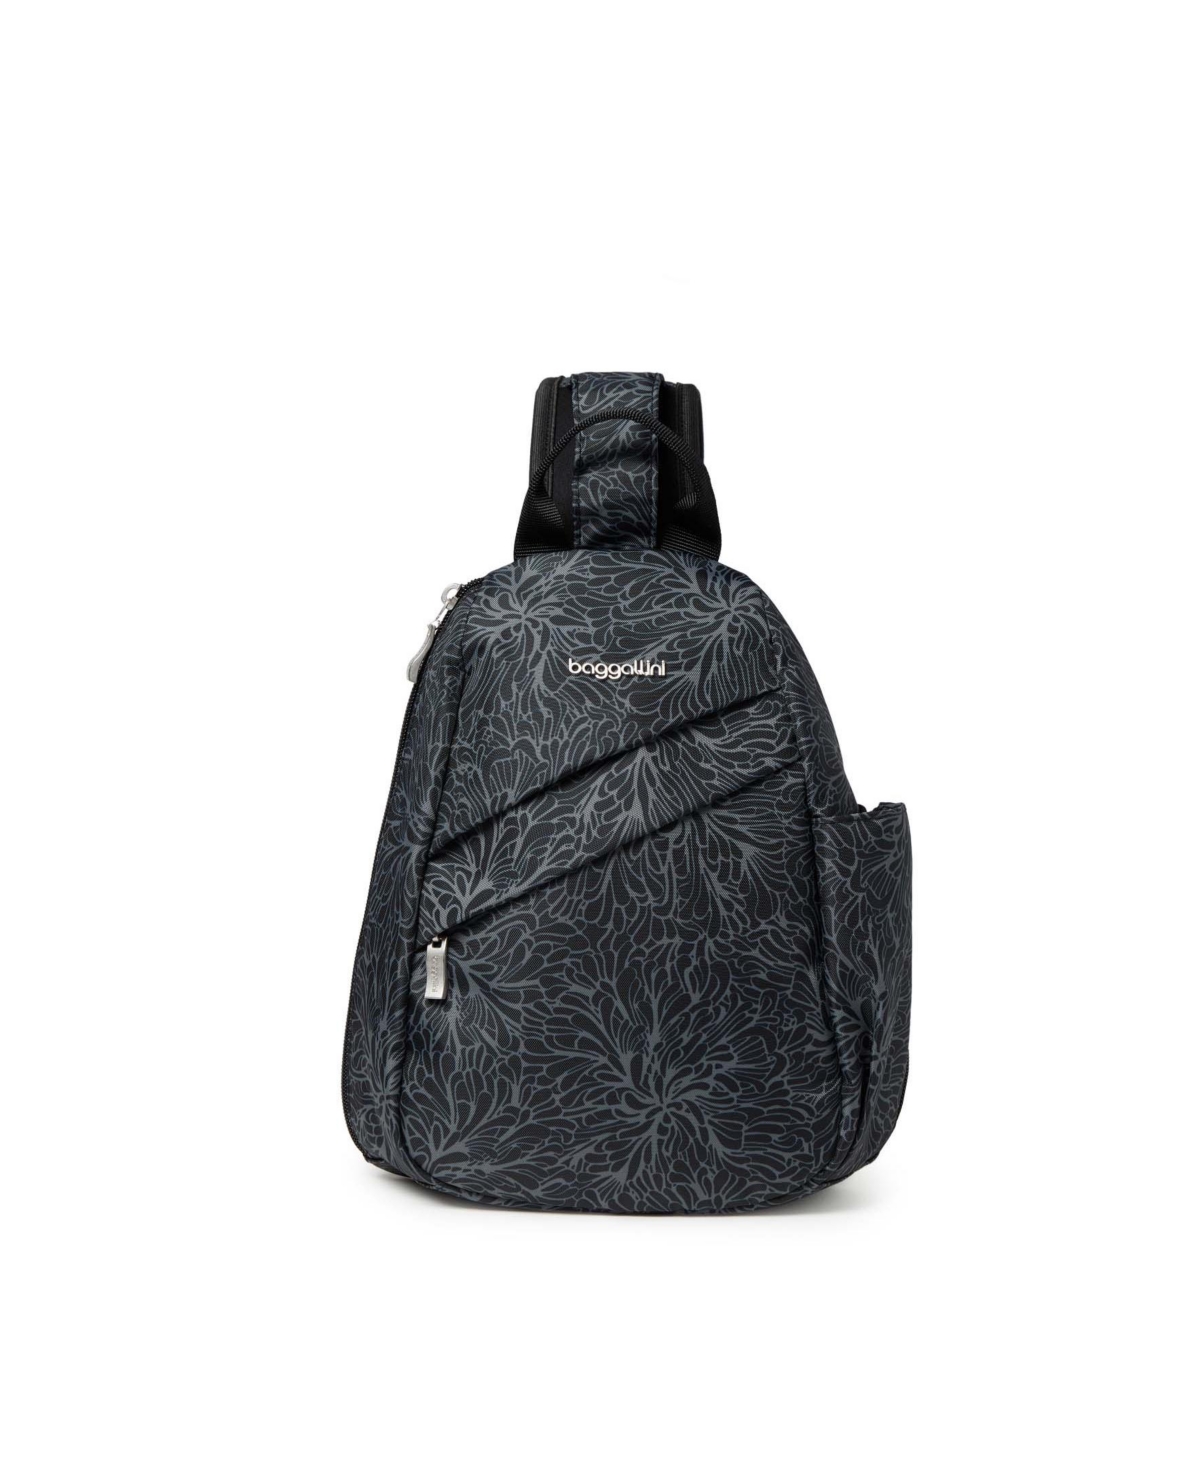 Baggallini Women's Sling Backpack In Midnight Blossom